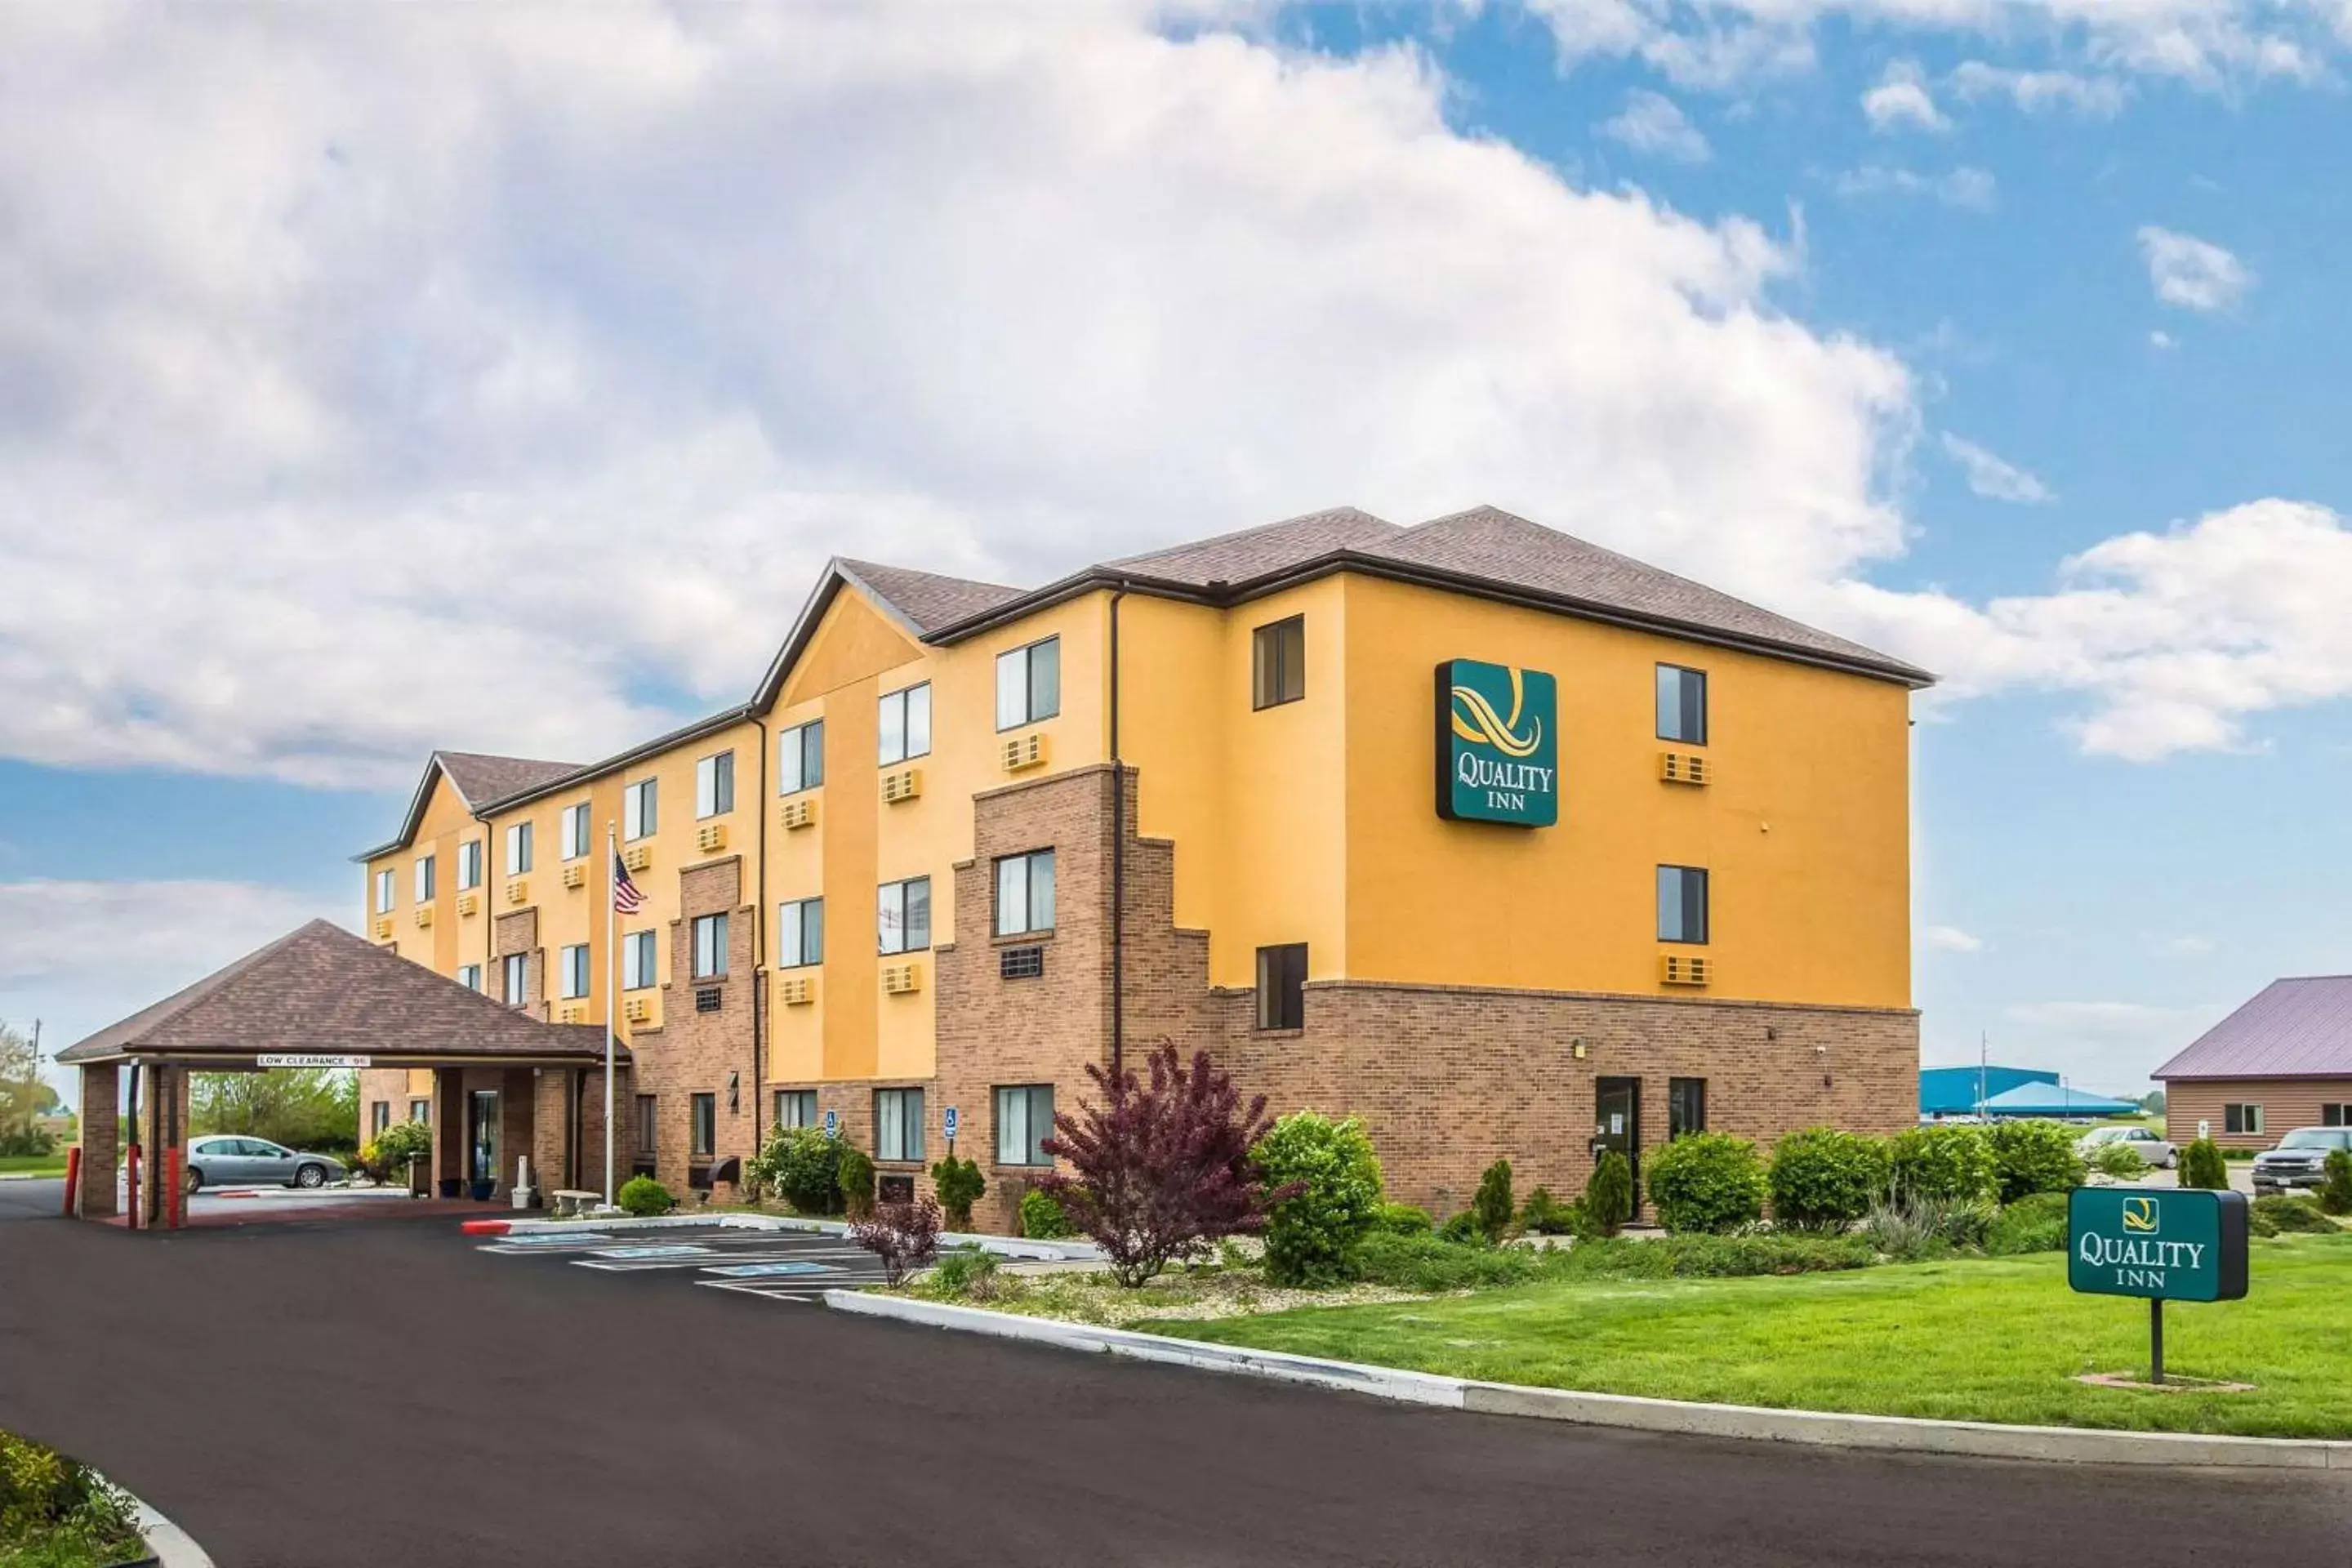 Property Building in Quality Inn Peru near Starved Rock State Park